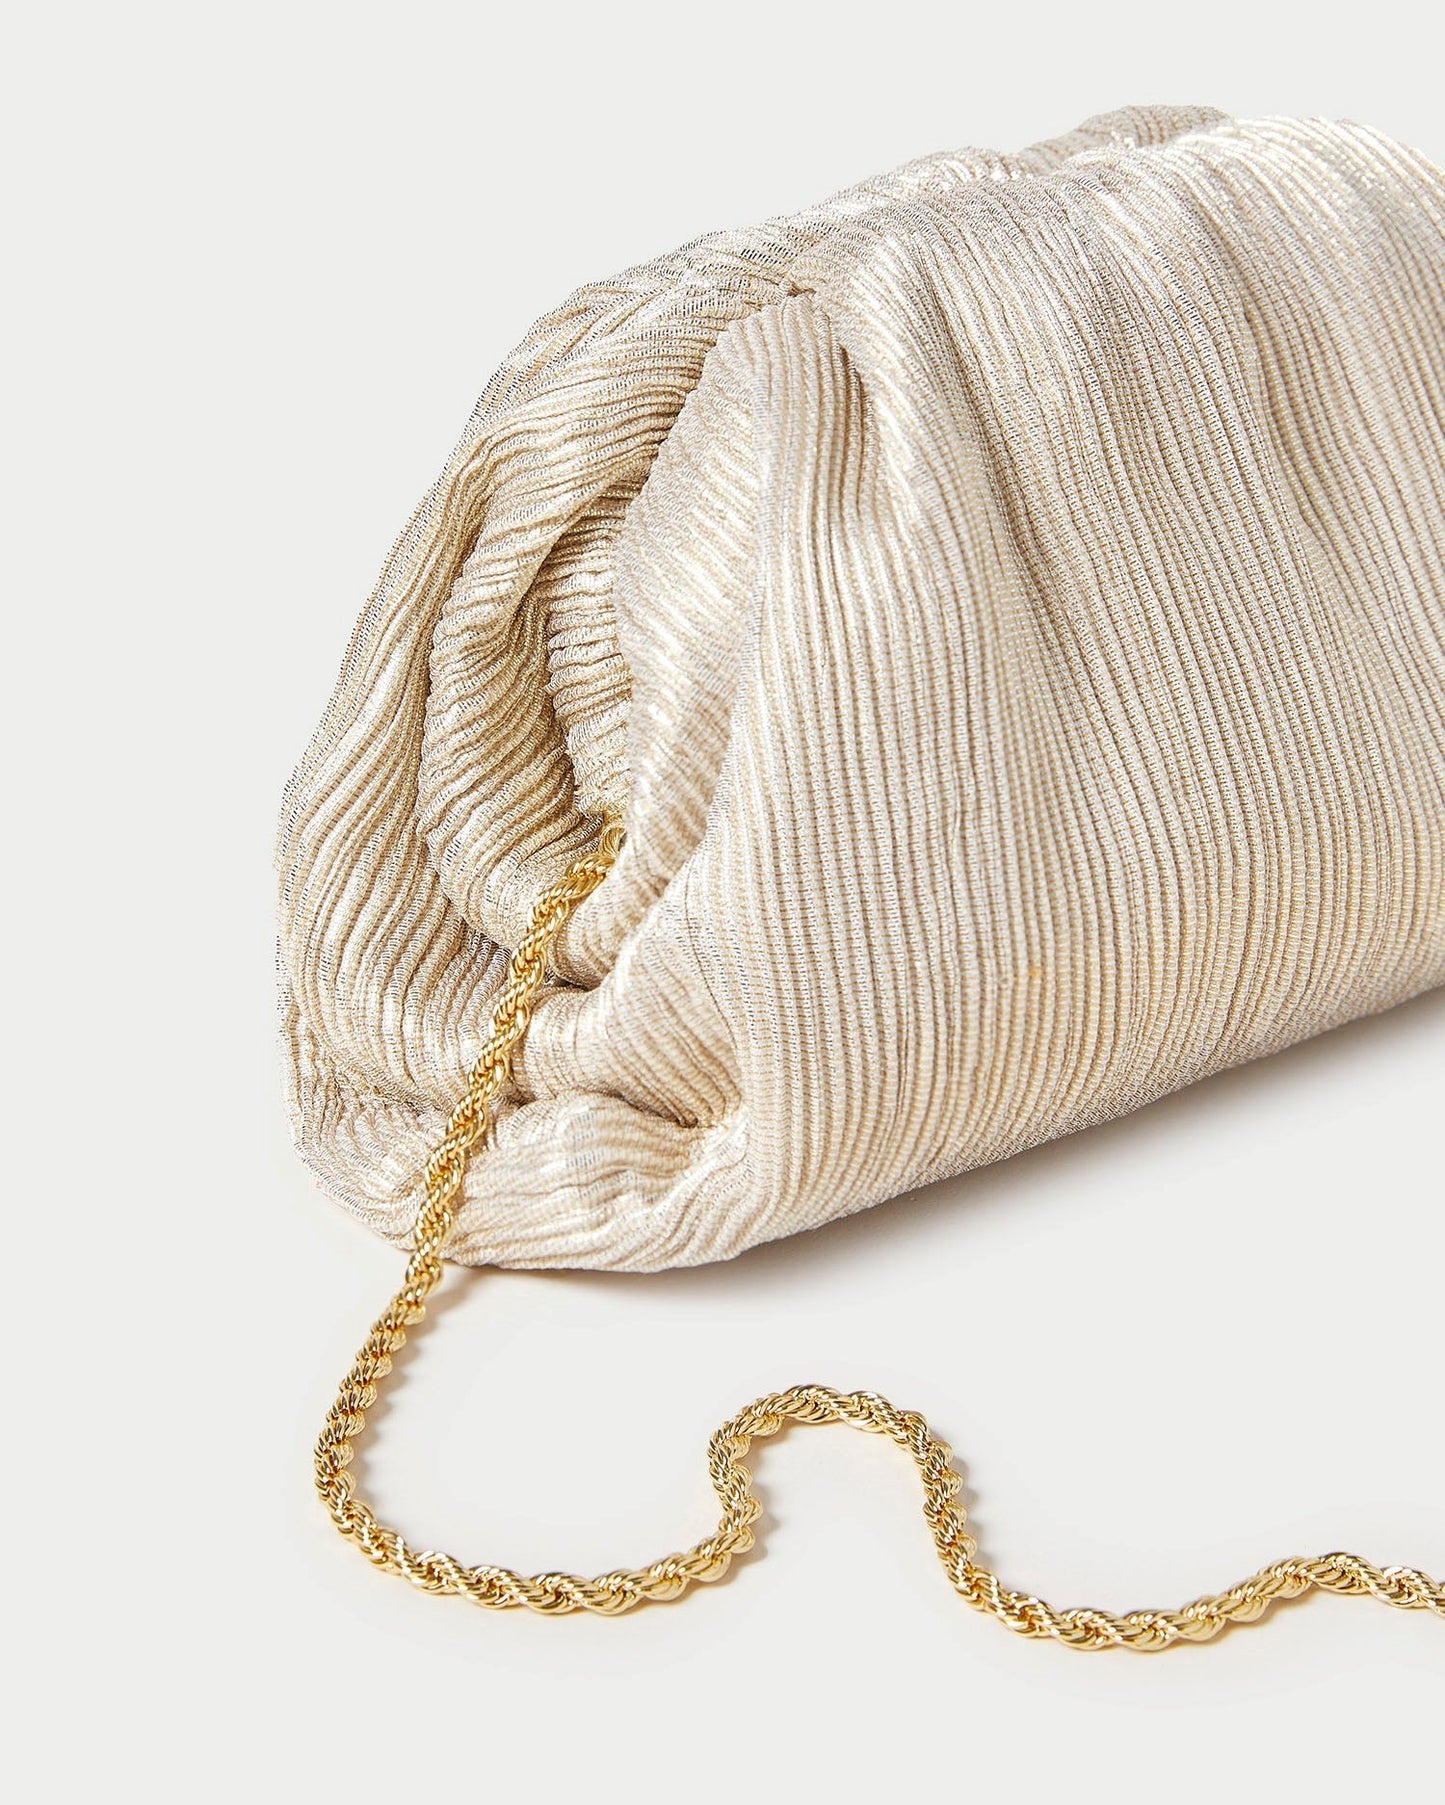 Bailey Silver Pleated Dome Clutch